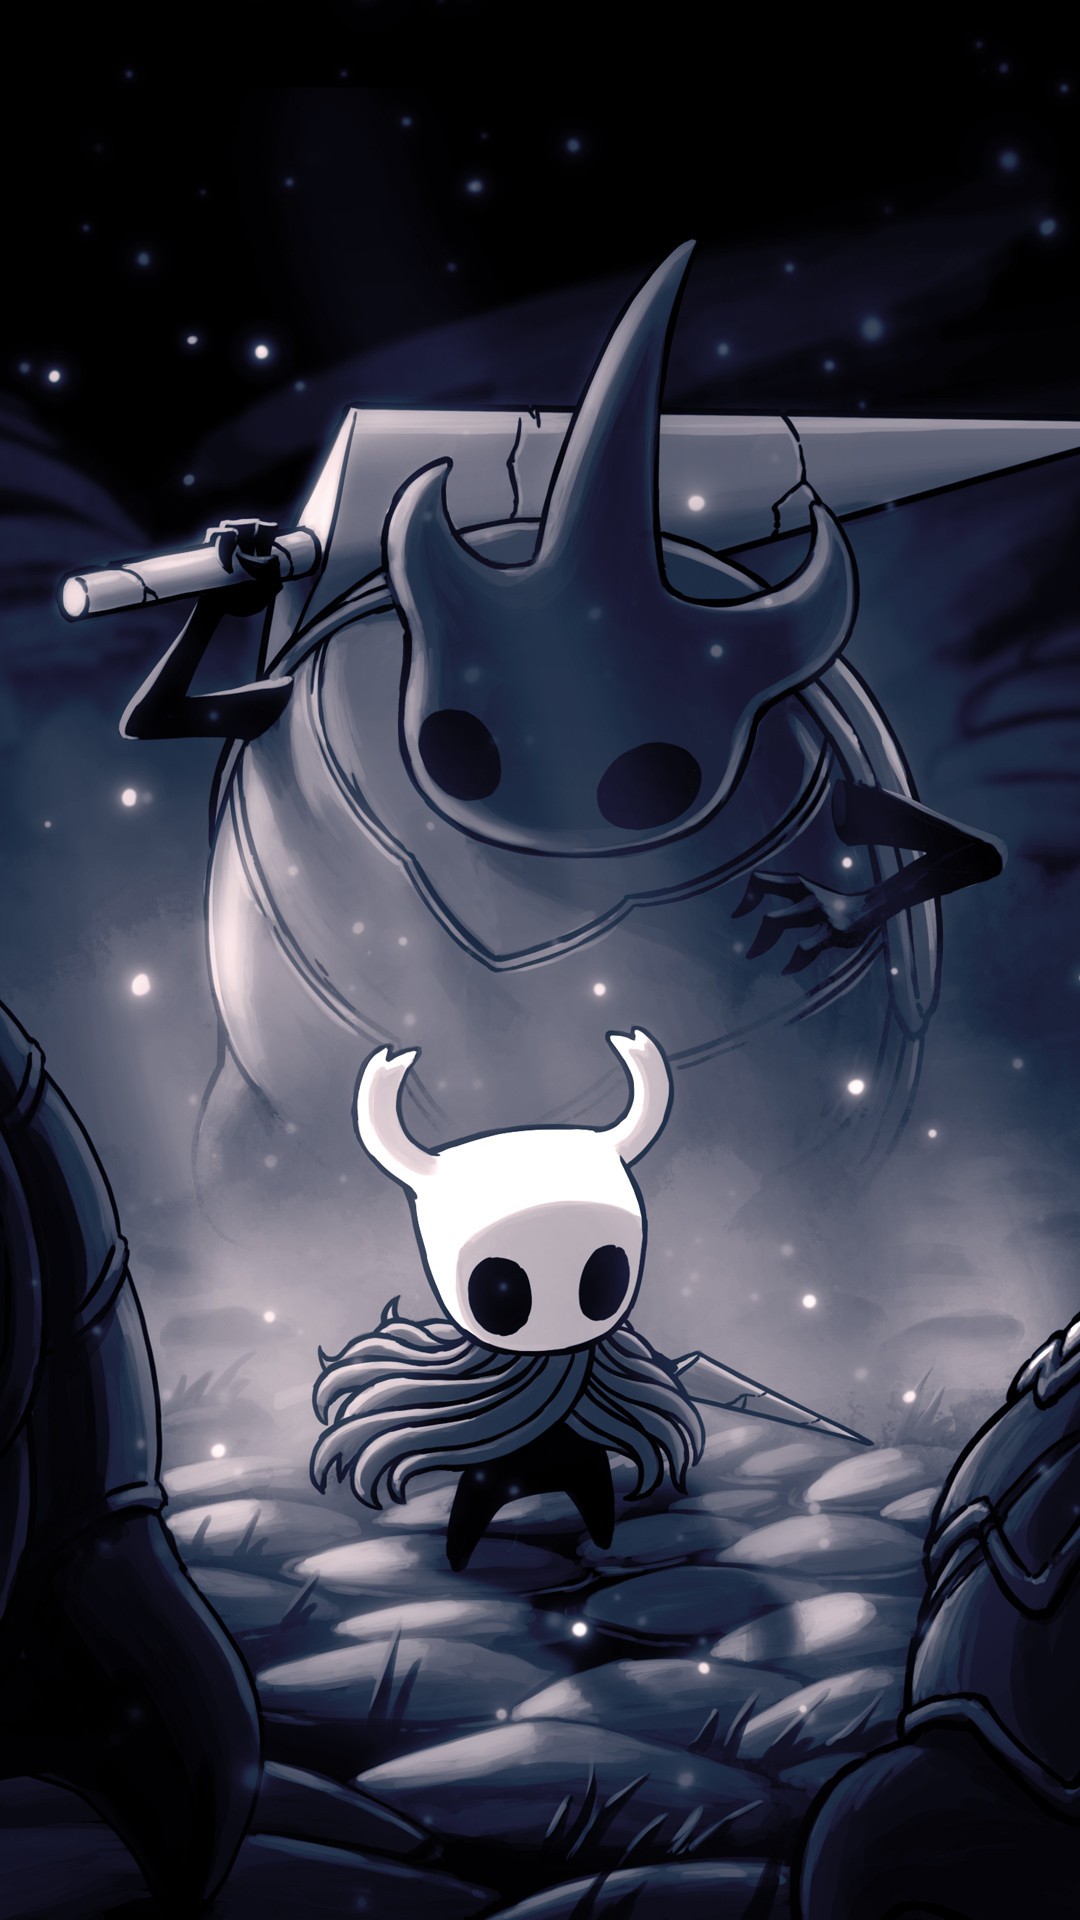 Wallpaper ID 372508  Video Game Hollow Knight Phone Wallpaper   1080x2220 free download